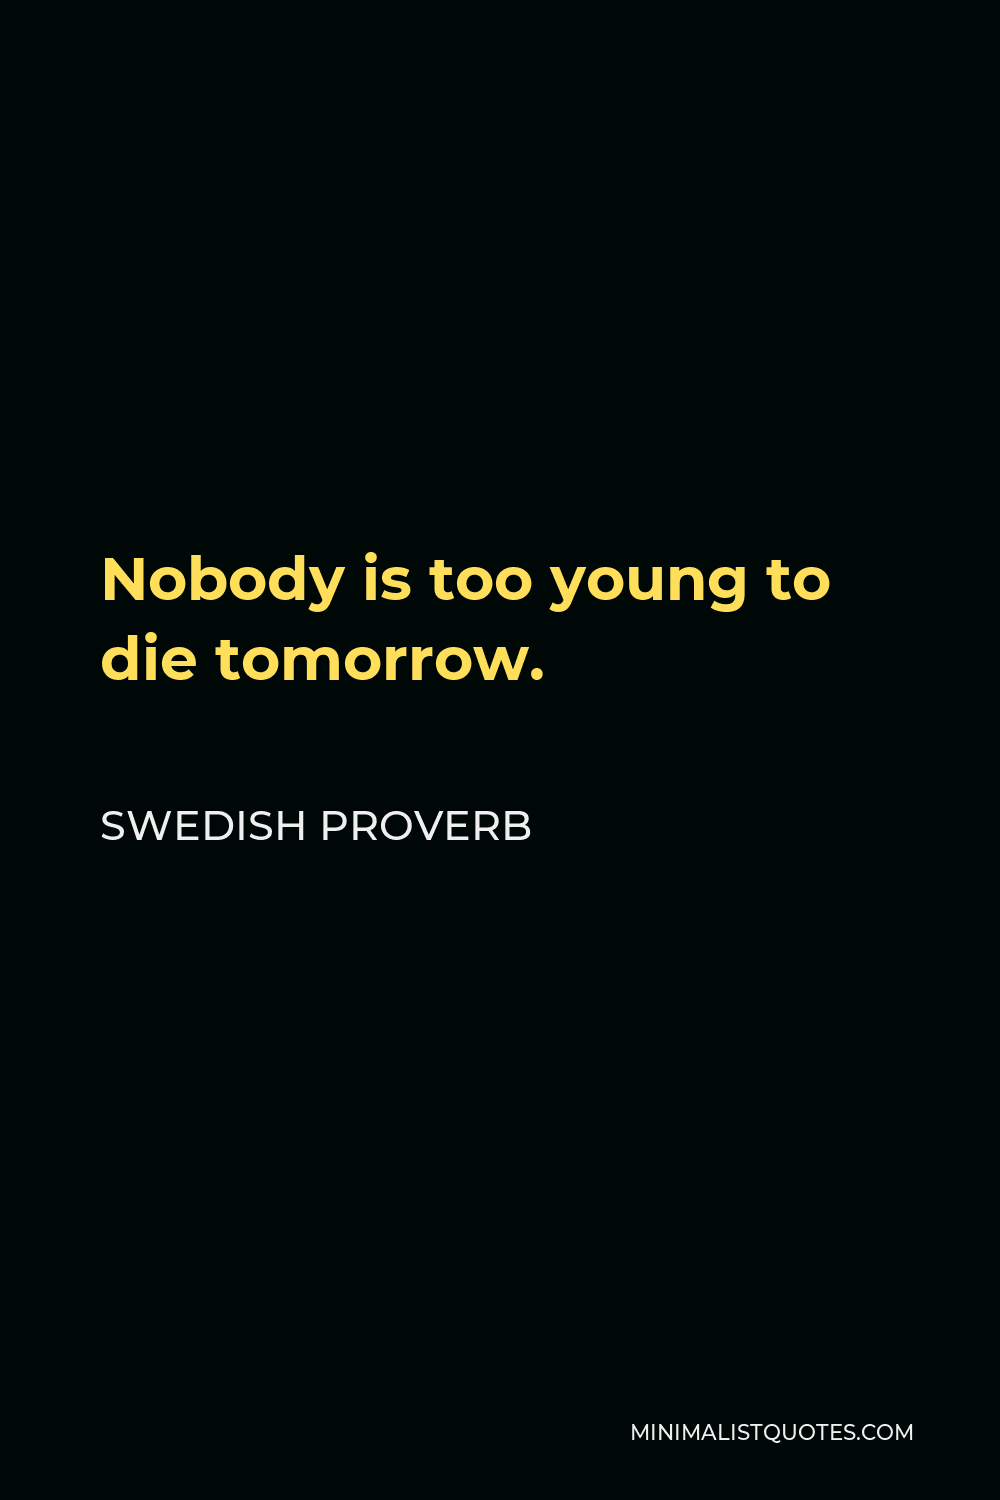 Swedish Proverb Quote - Nobody is too young to die tomorrow.